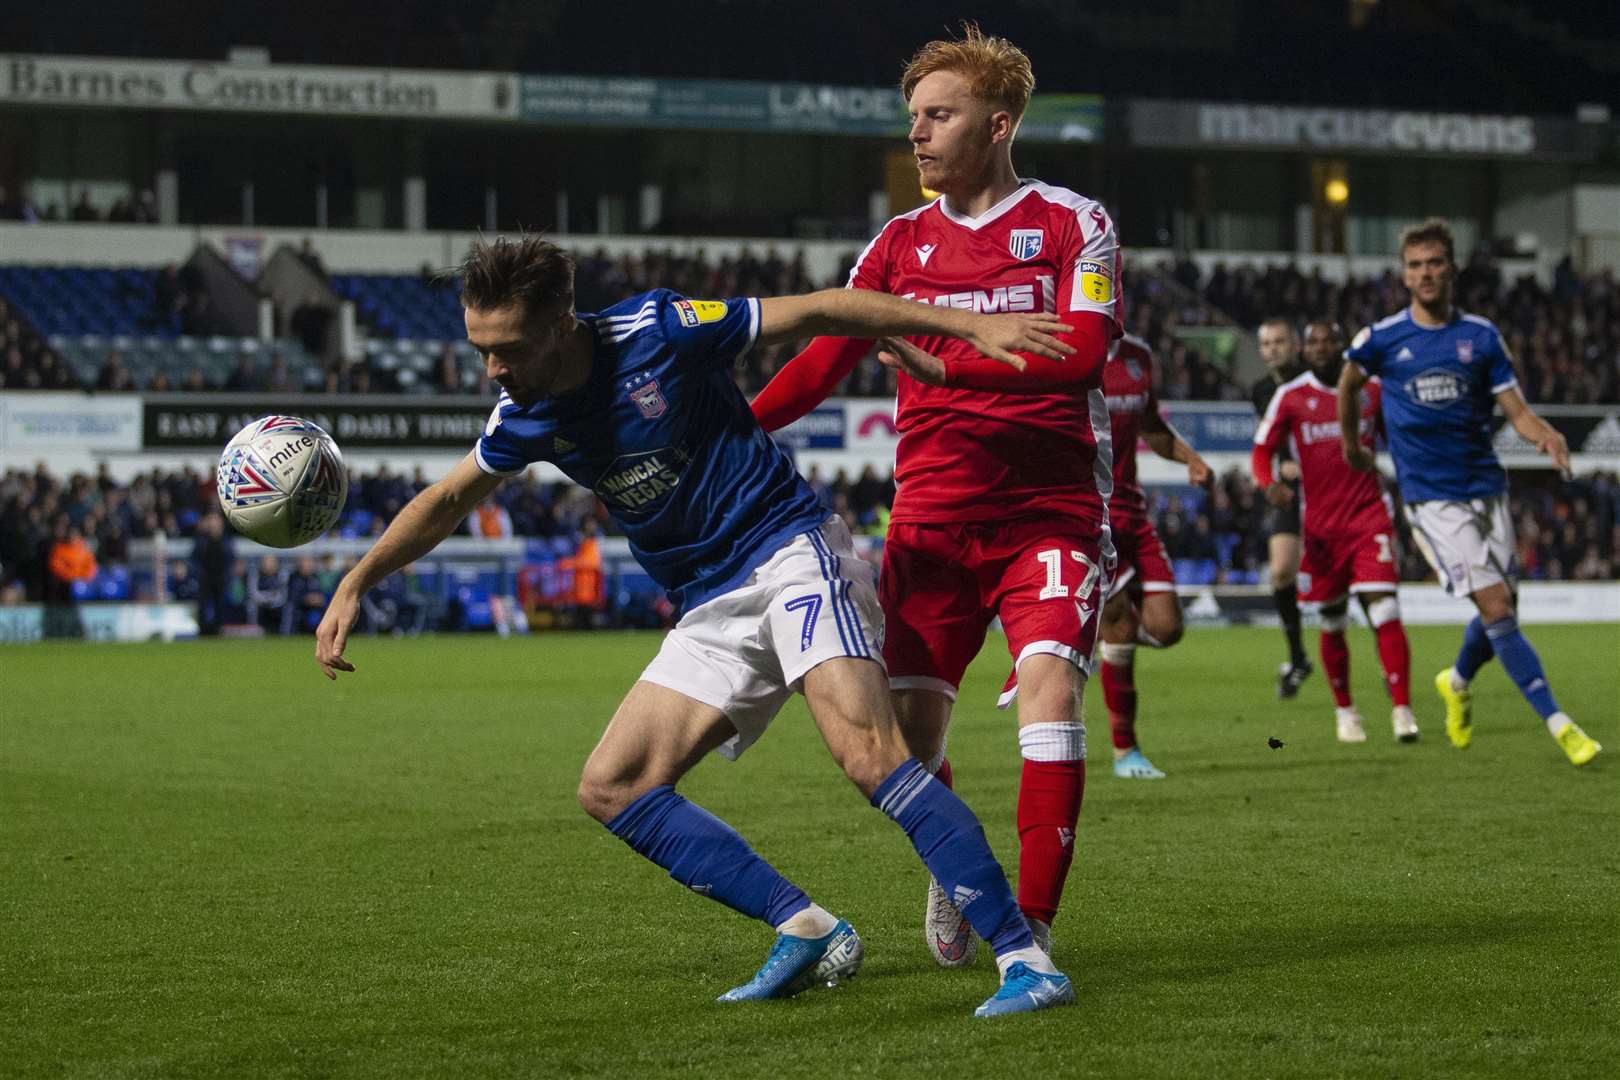 Ben Pringle in action at Fratton Park on Tuesday night Picture: @KentProImages